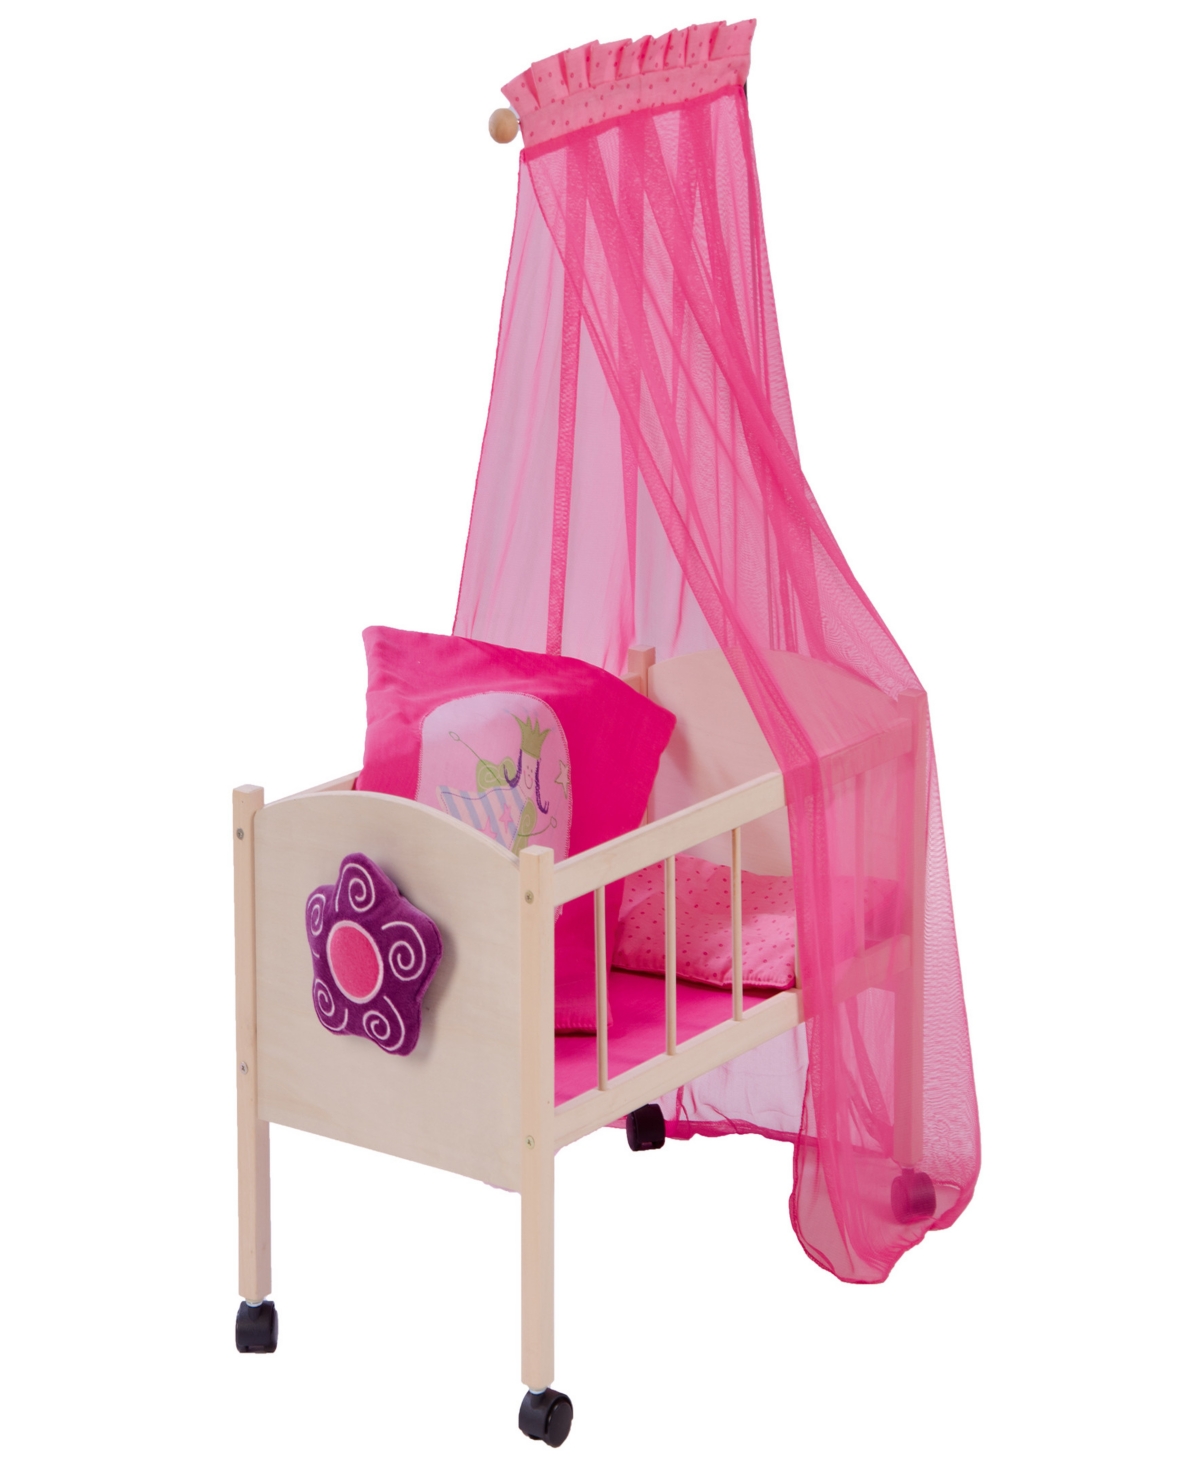 Roba-kids Kids' Doll Canopy Bed Happy Fee With Blanket And Pillow Children's Pretend Play In Multi